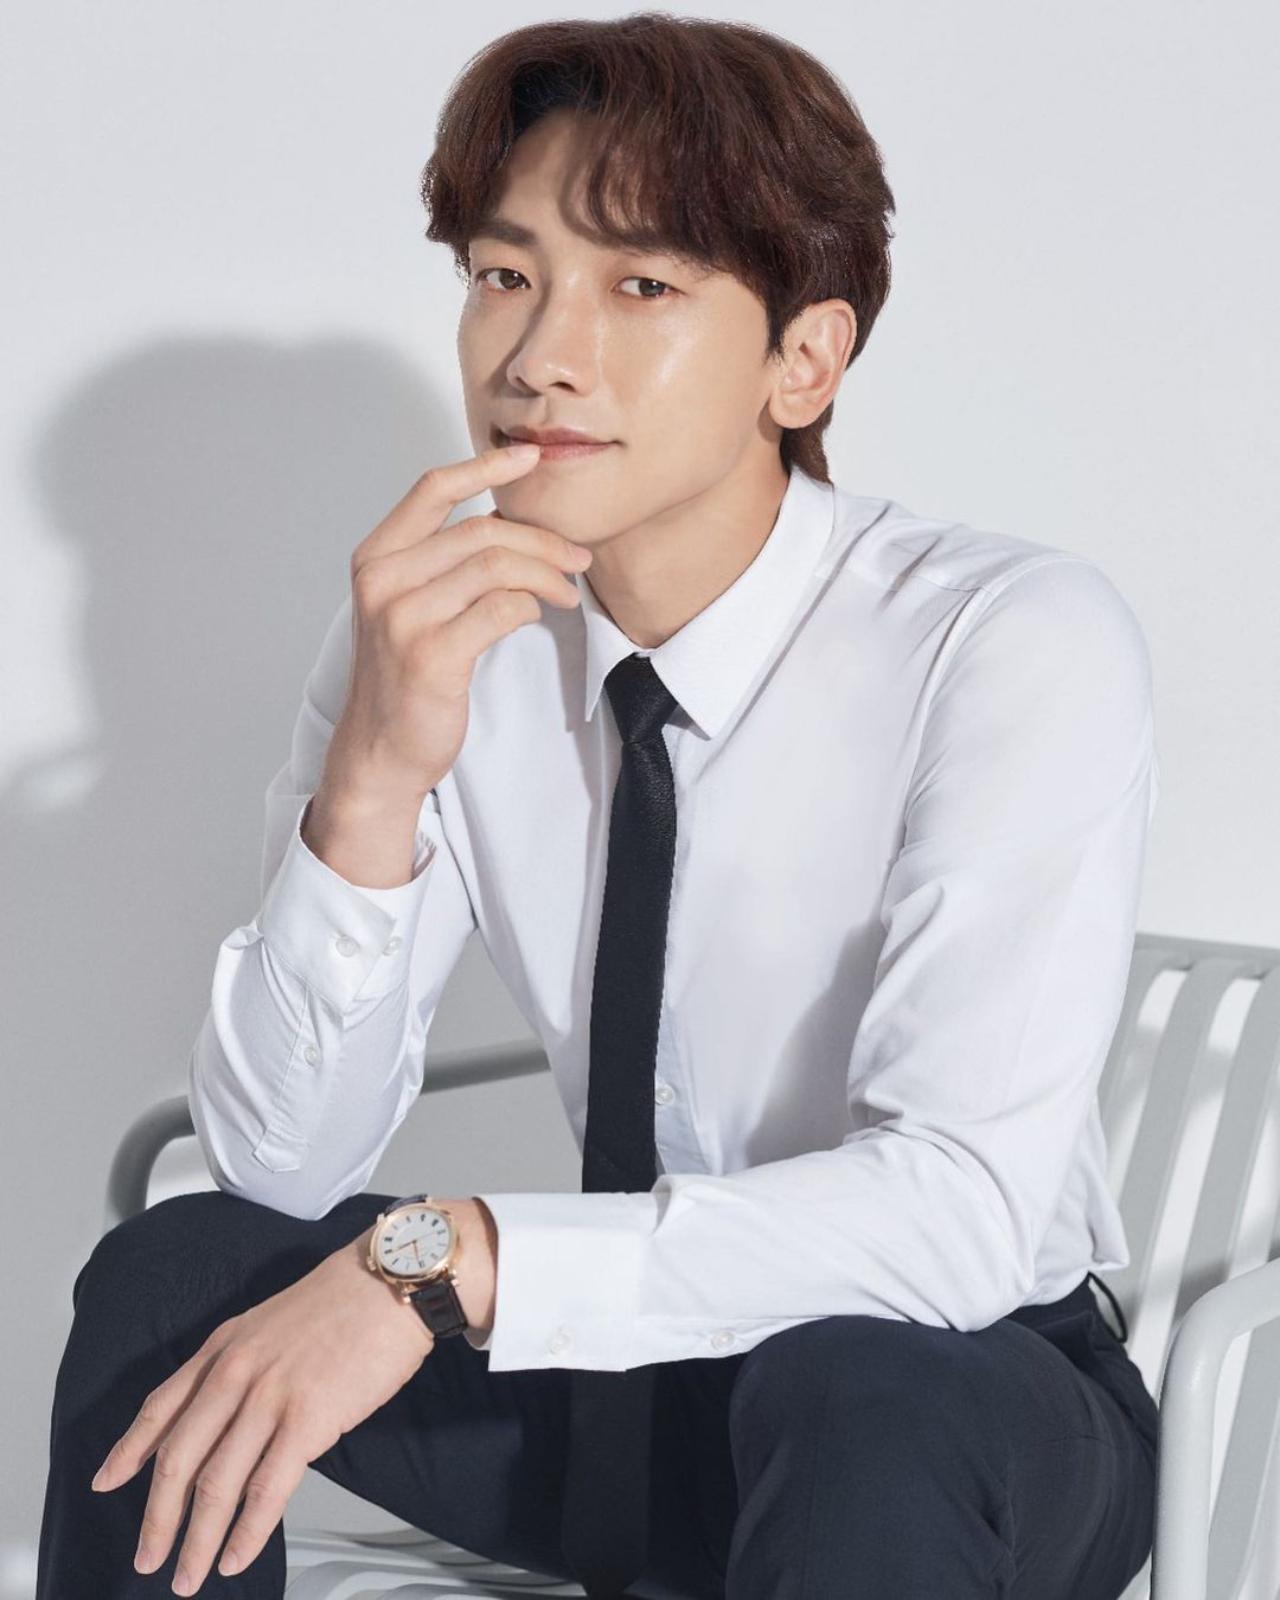 Rain
Renowned artist Rain, born Jung Ji-hoon, is a pivotal figure from the early generation of K-pop and Korean dramas. As a multifaceted talent, he has many feathers in his cap including singer, songwriter, dancer, actor, and record producer. Rain has been an international icon since the early days of the Hallyu Wave